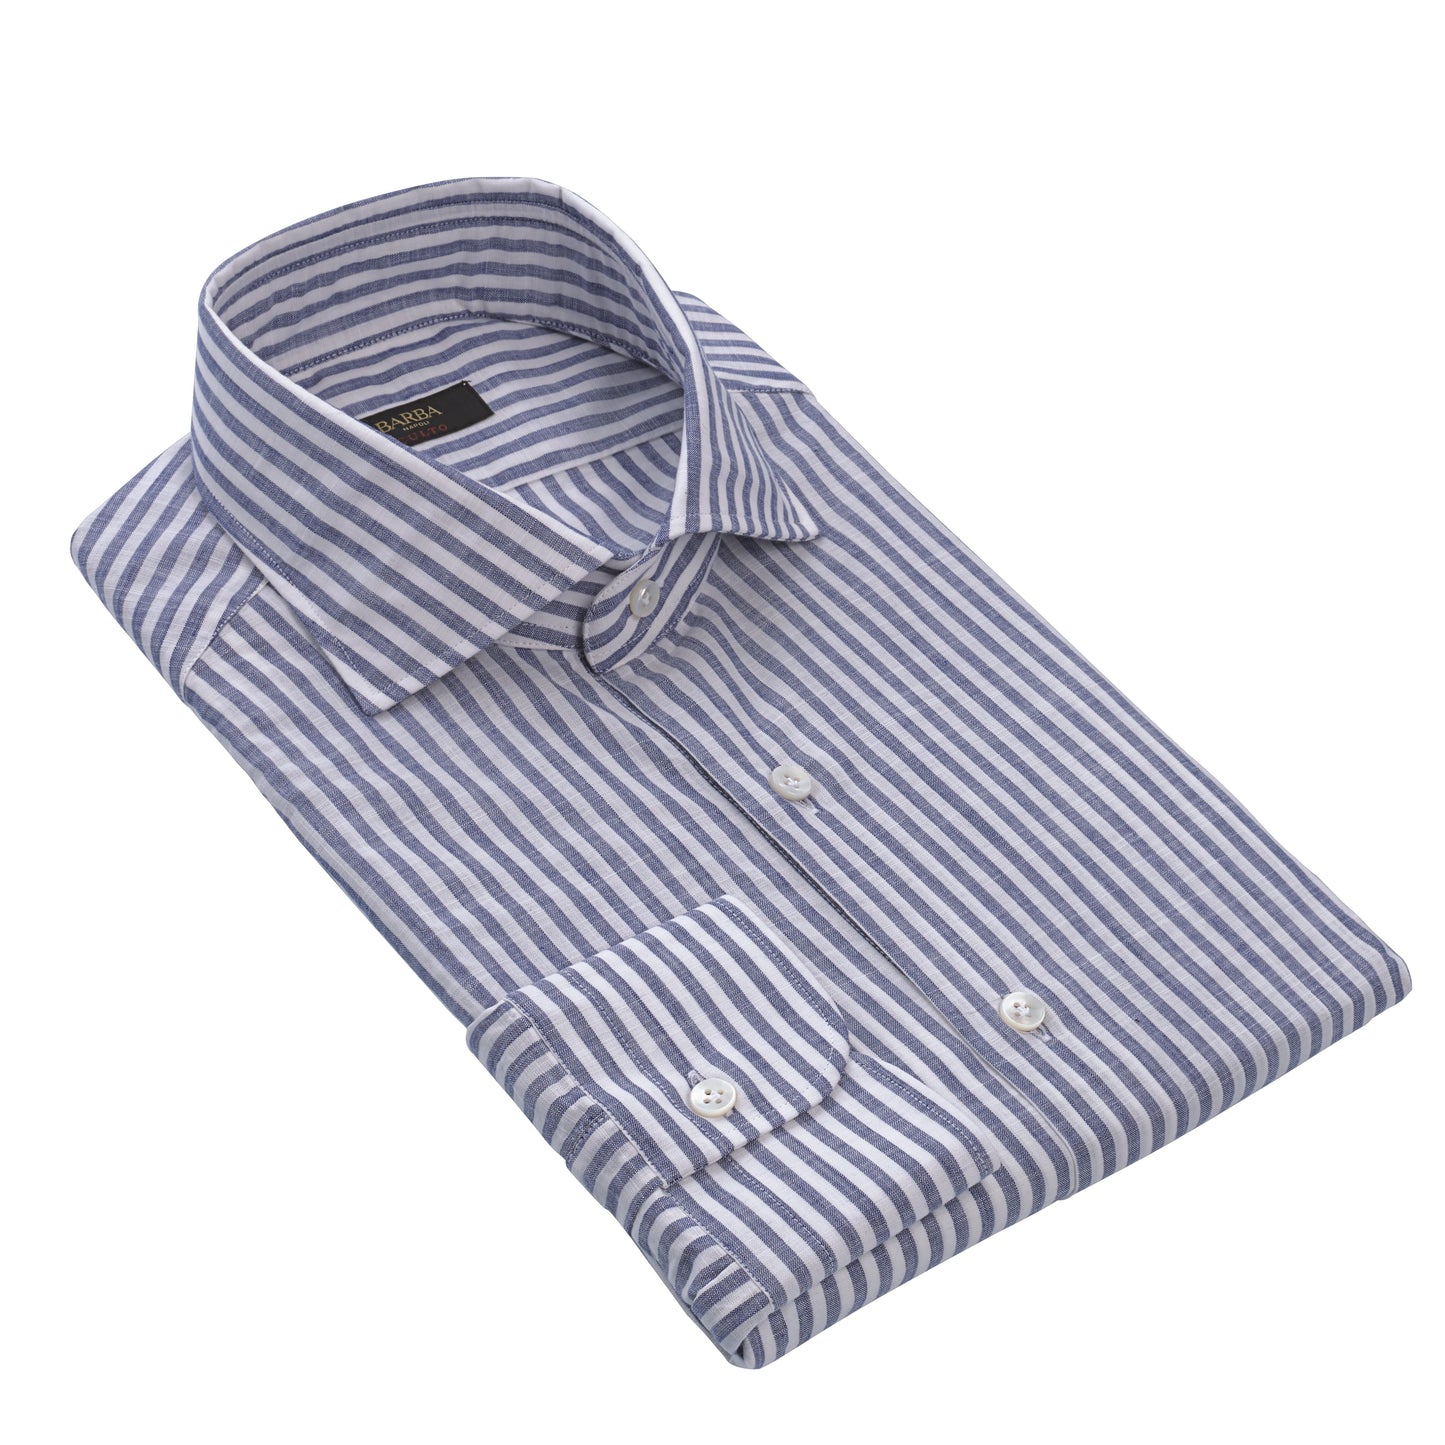 Striped Cotton Shirt in Blue and White